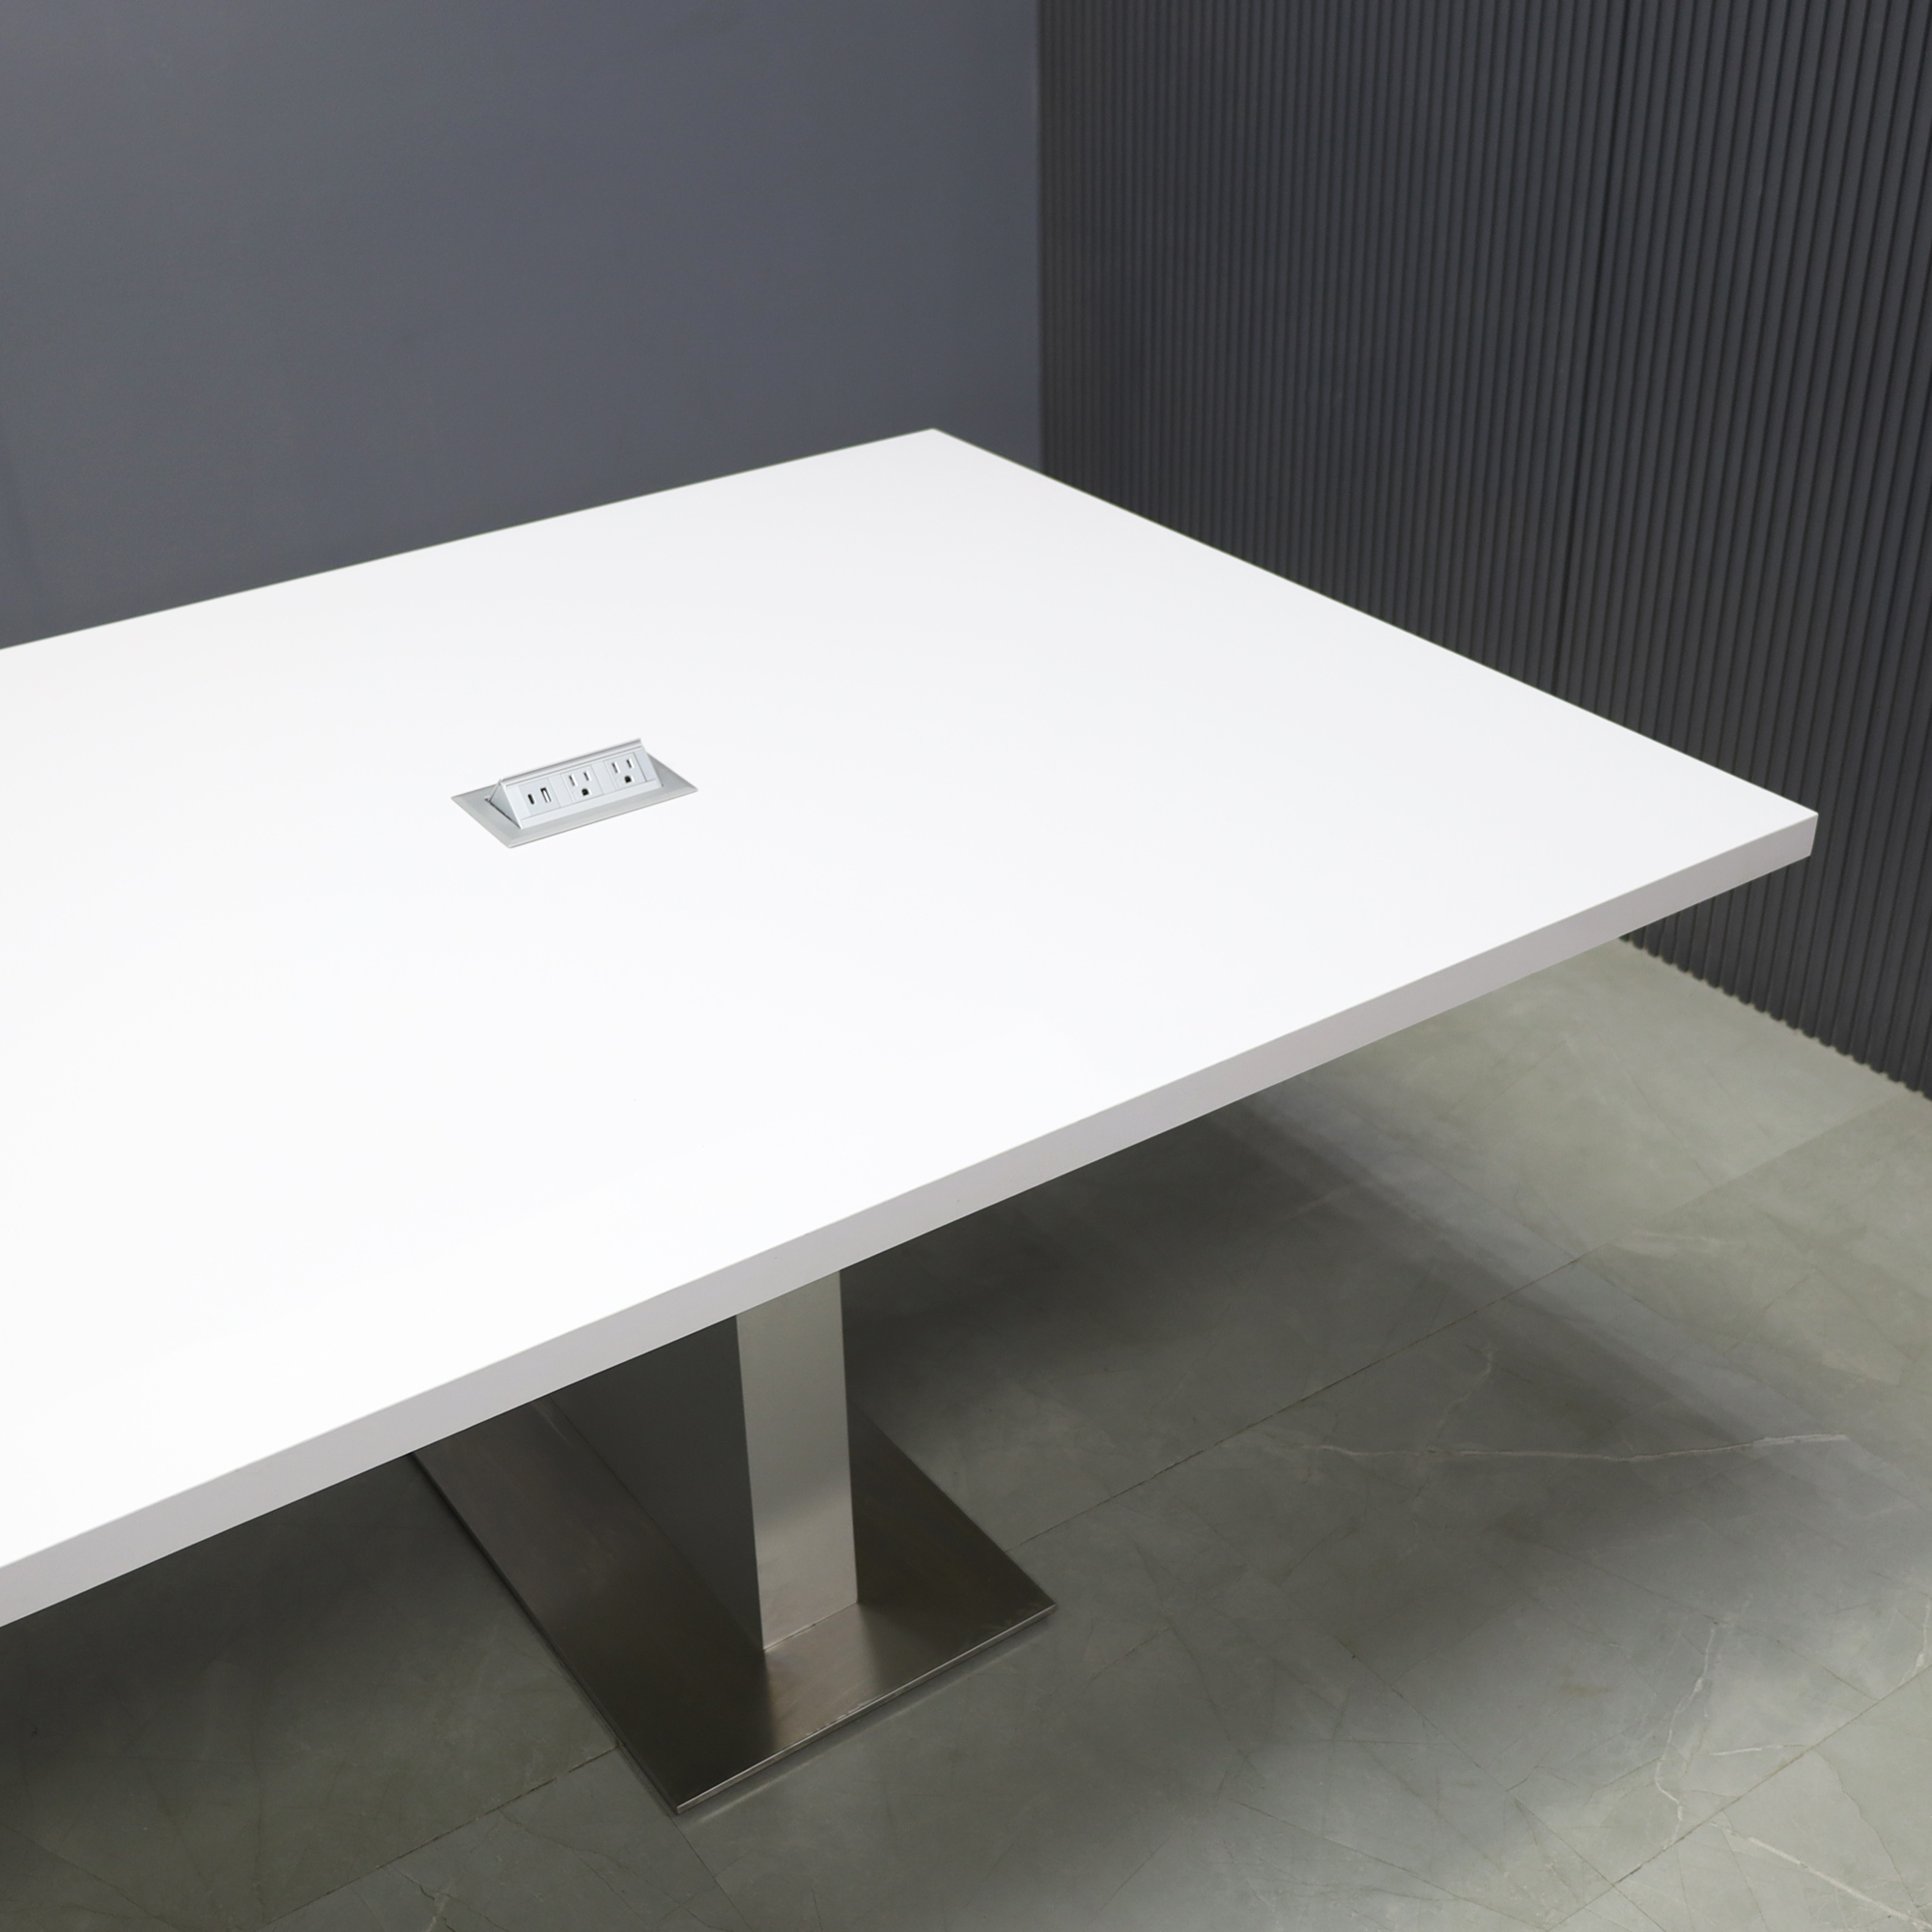 120-inch Newton Rectangular Conference Table in white gloss laminate top and brushed aluminum laminate custom pedestal base, with two silver MX2 powerboxes, shown here.